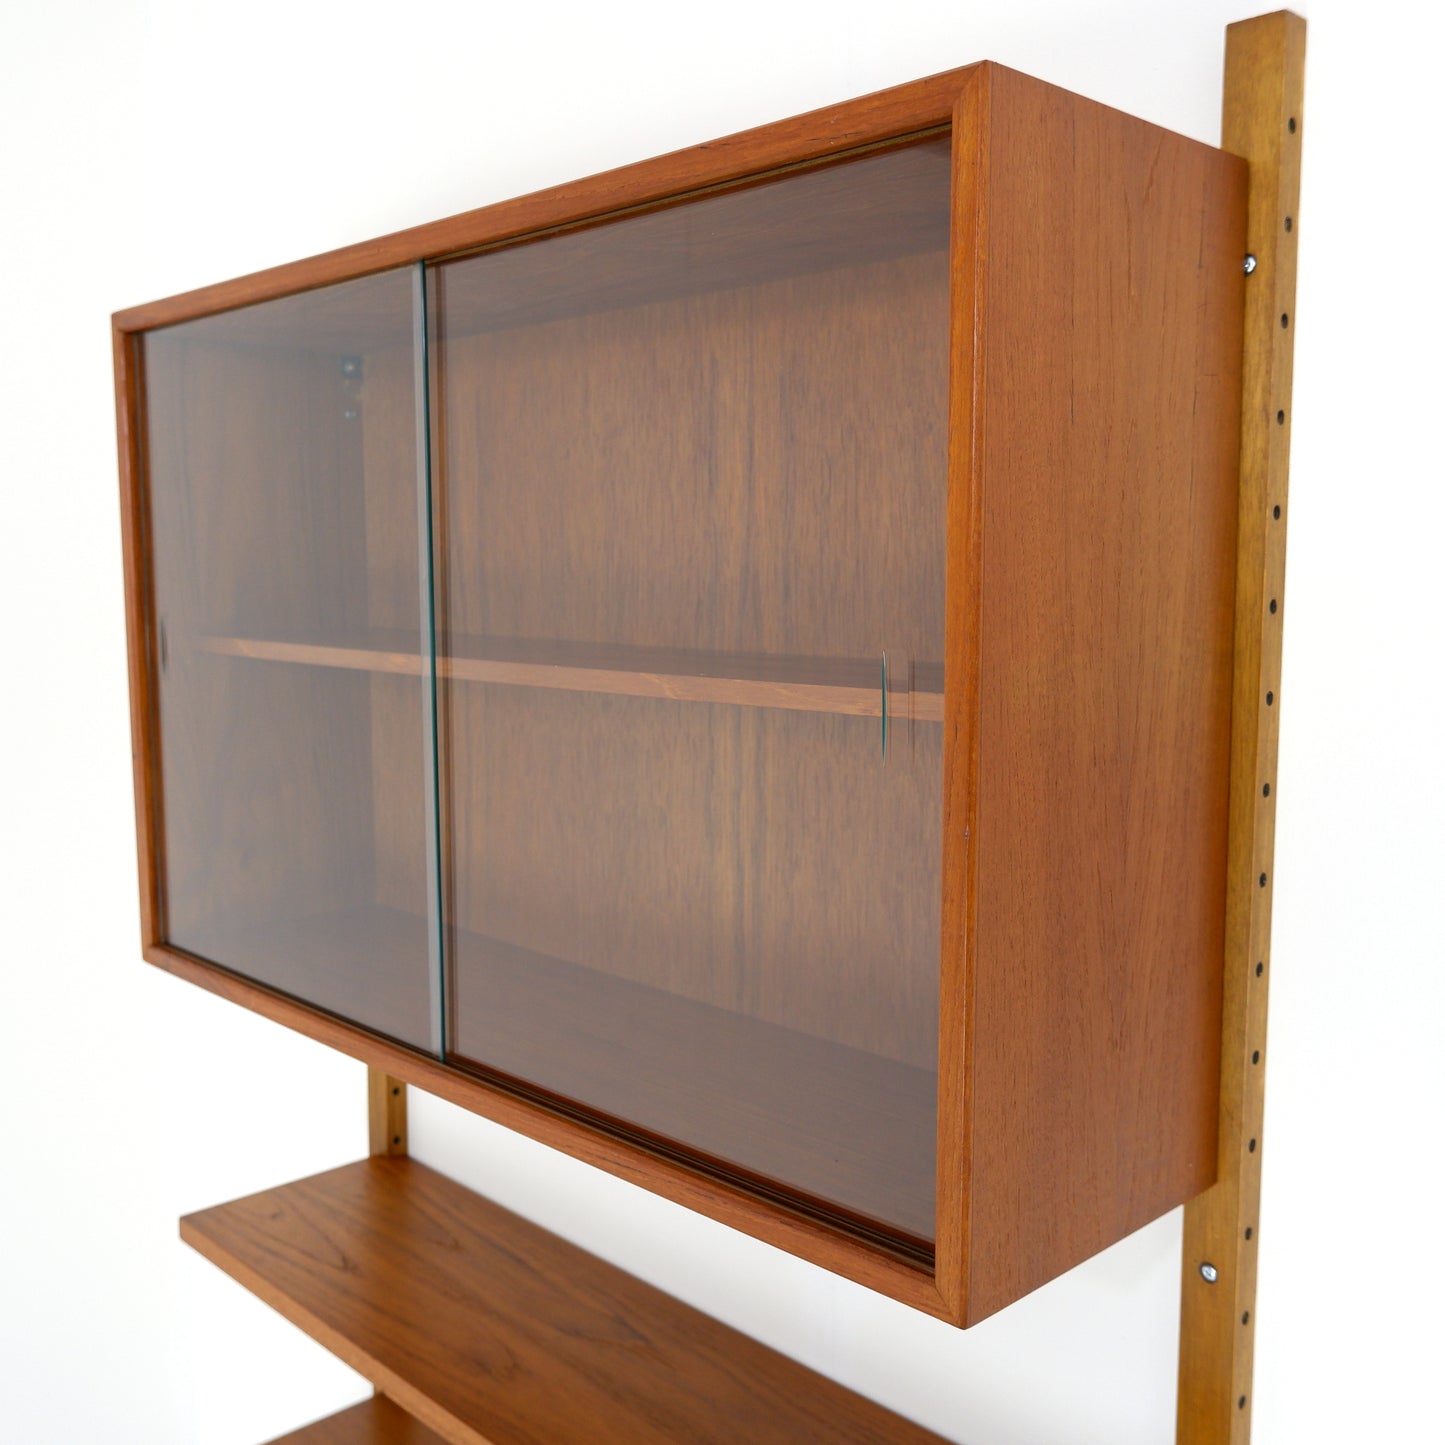 Danish Modern PS System Shelving Unit in Teak - Modular Desk and Cabinets with Bookcase Shelves